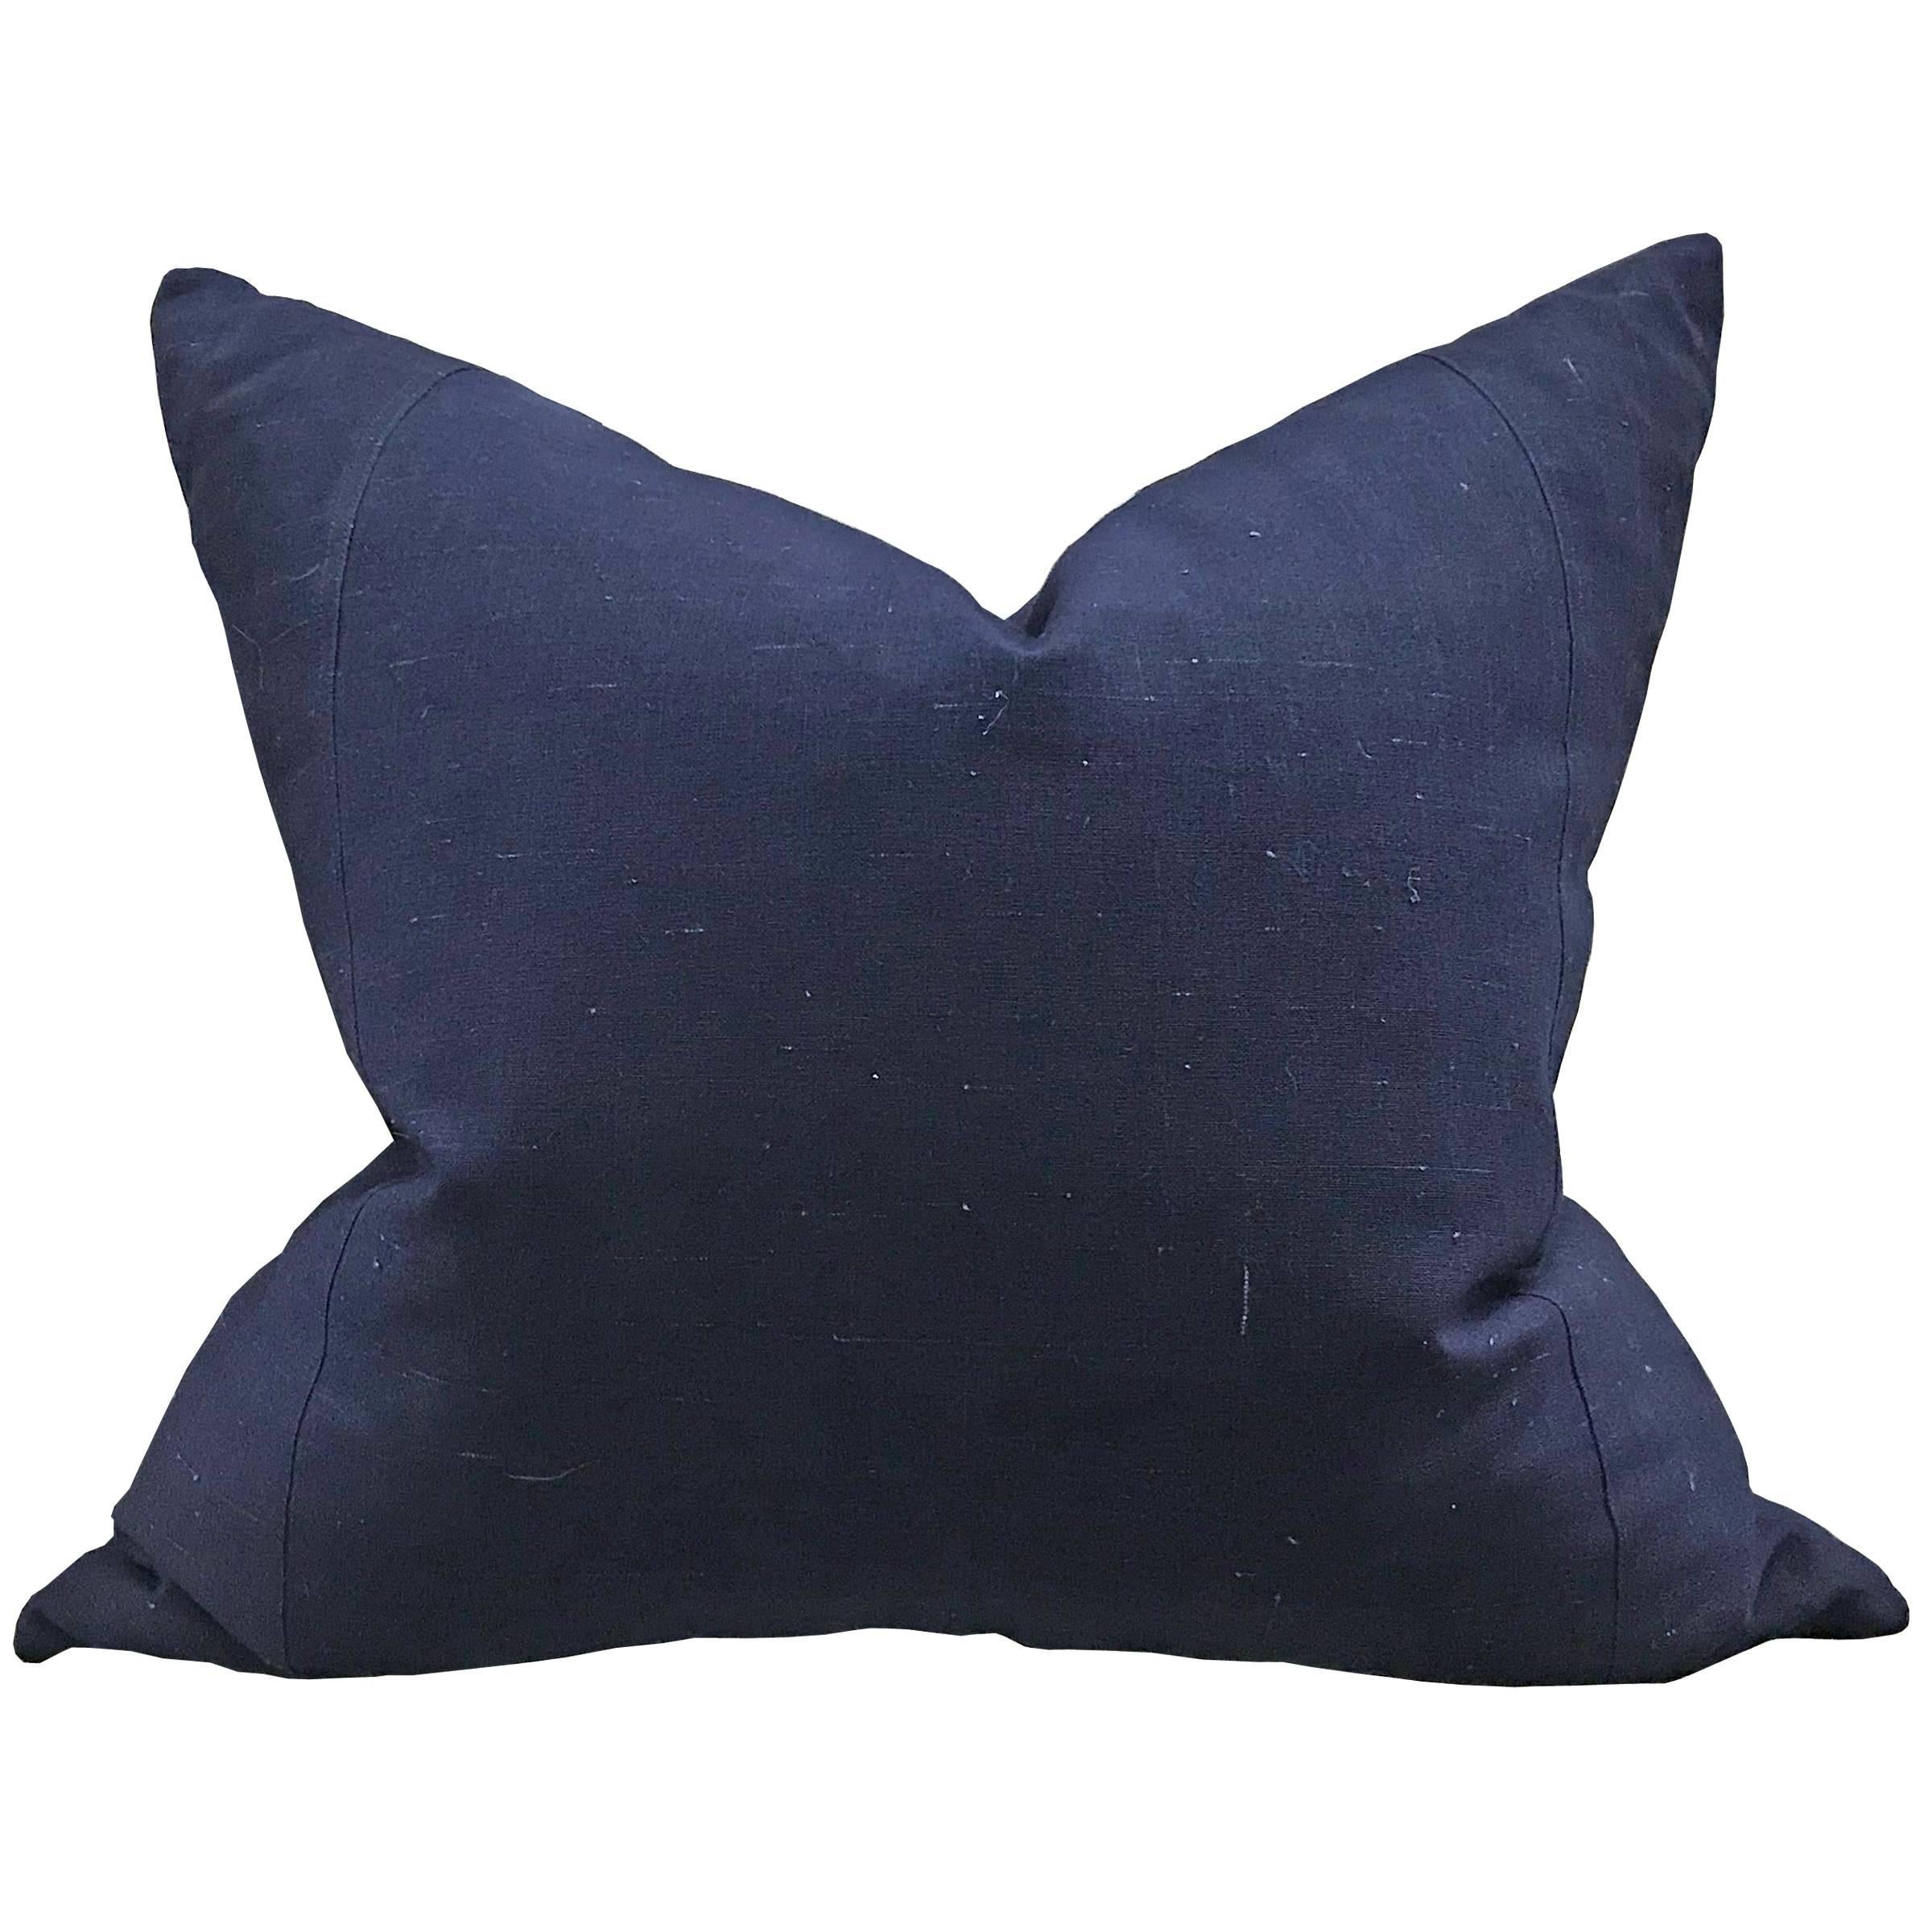 Set of three pillows made from mid-20th century Chinese indigo cotton panels with natural slubs, and filled with down.